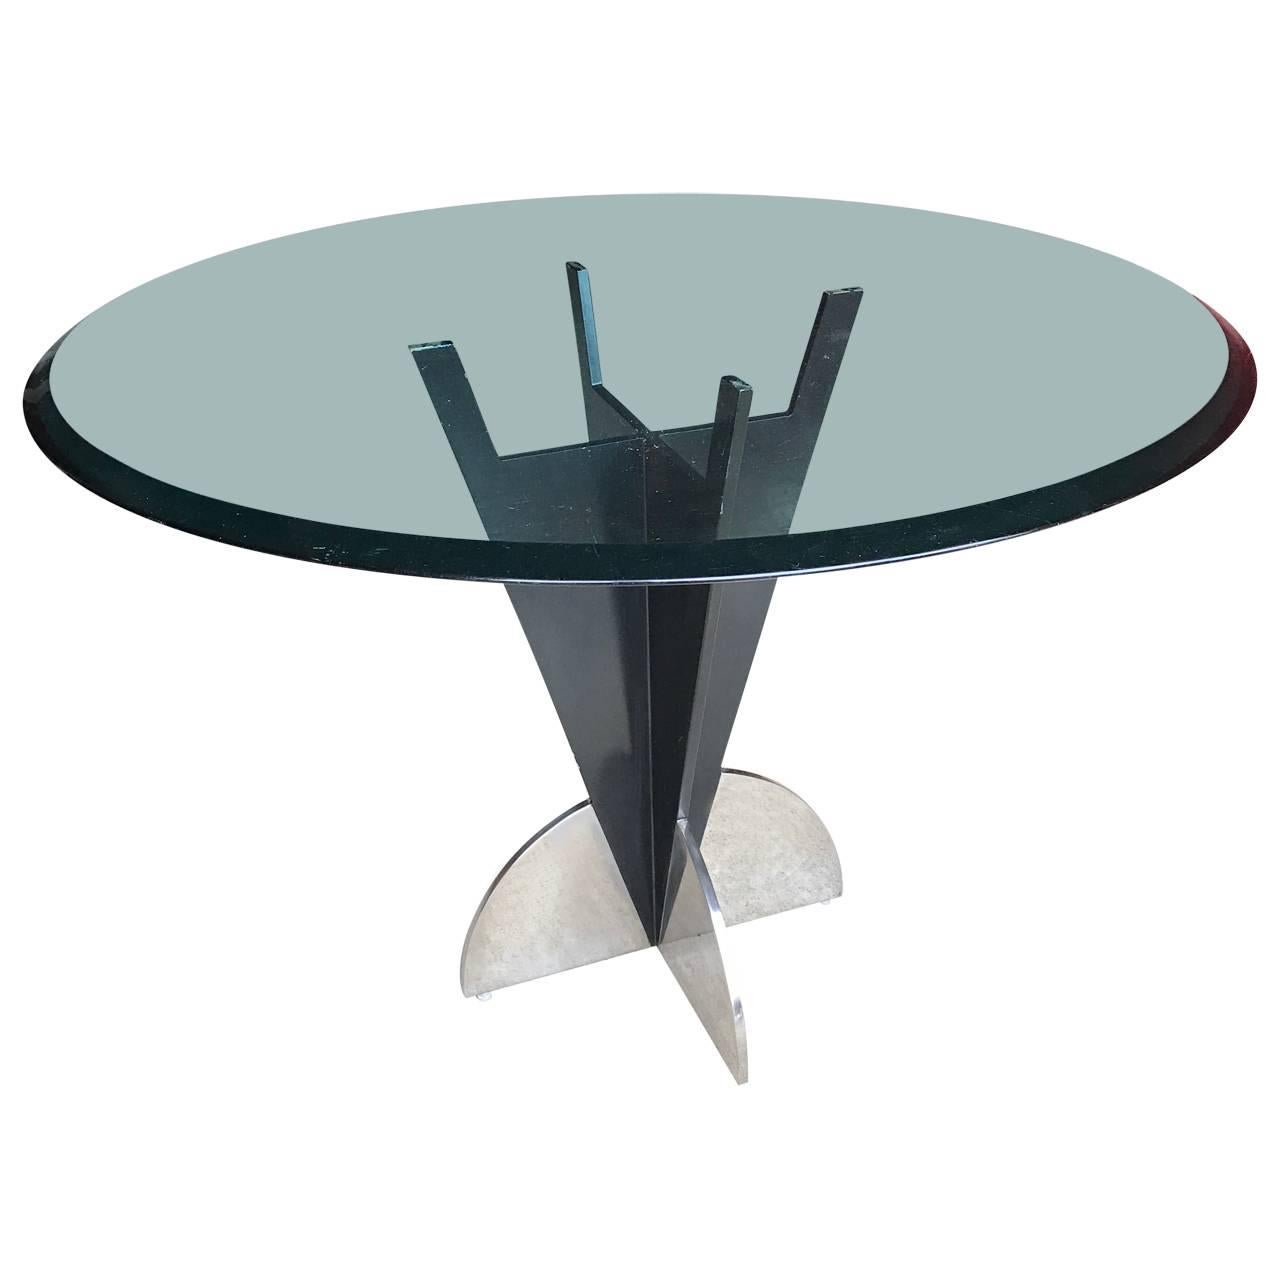 American modern steel and glass top table, attributed to Floridian Michael O design

$125 flat rate front door delivery includes Washington DC metro, Baltimore and Philadelphia